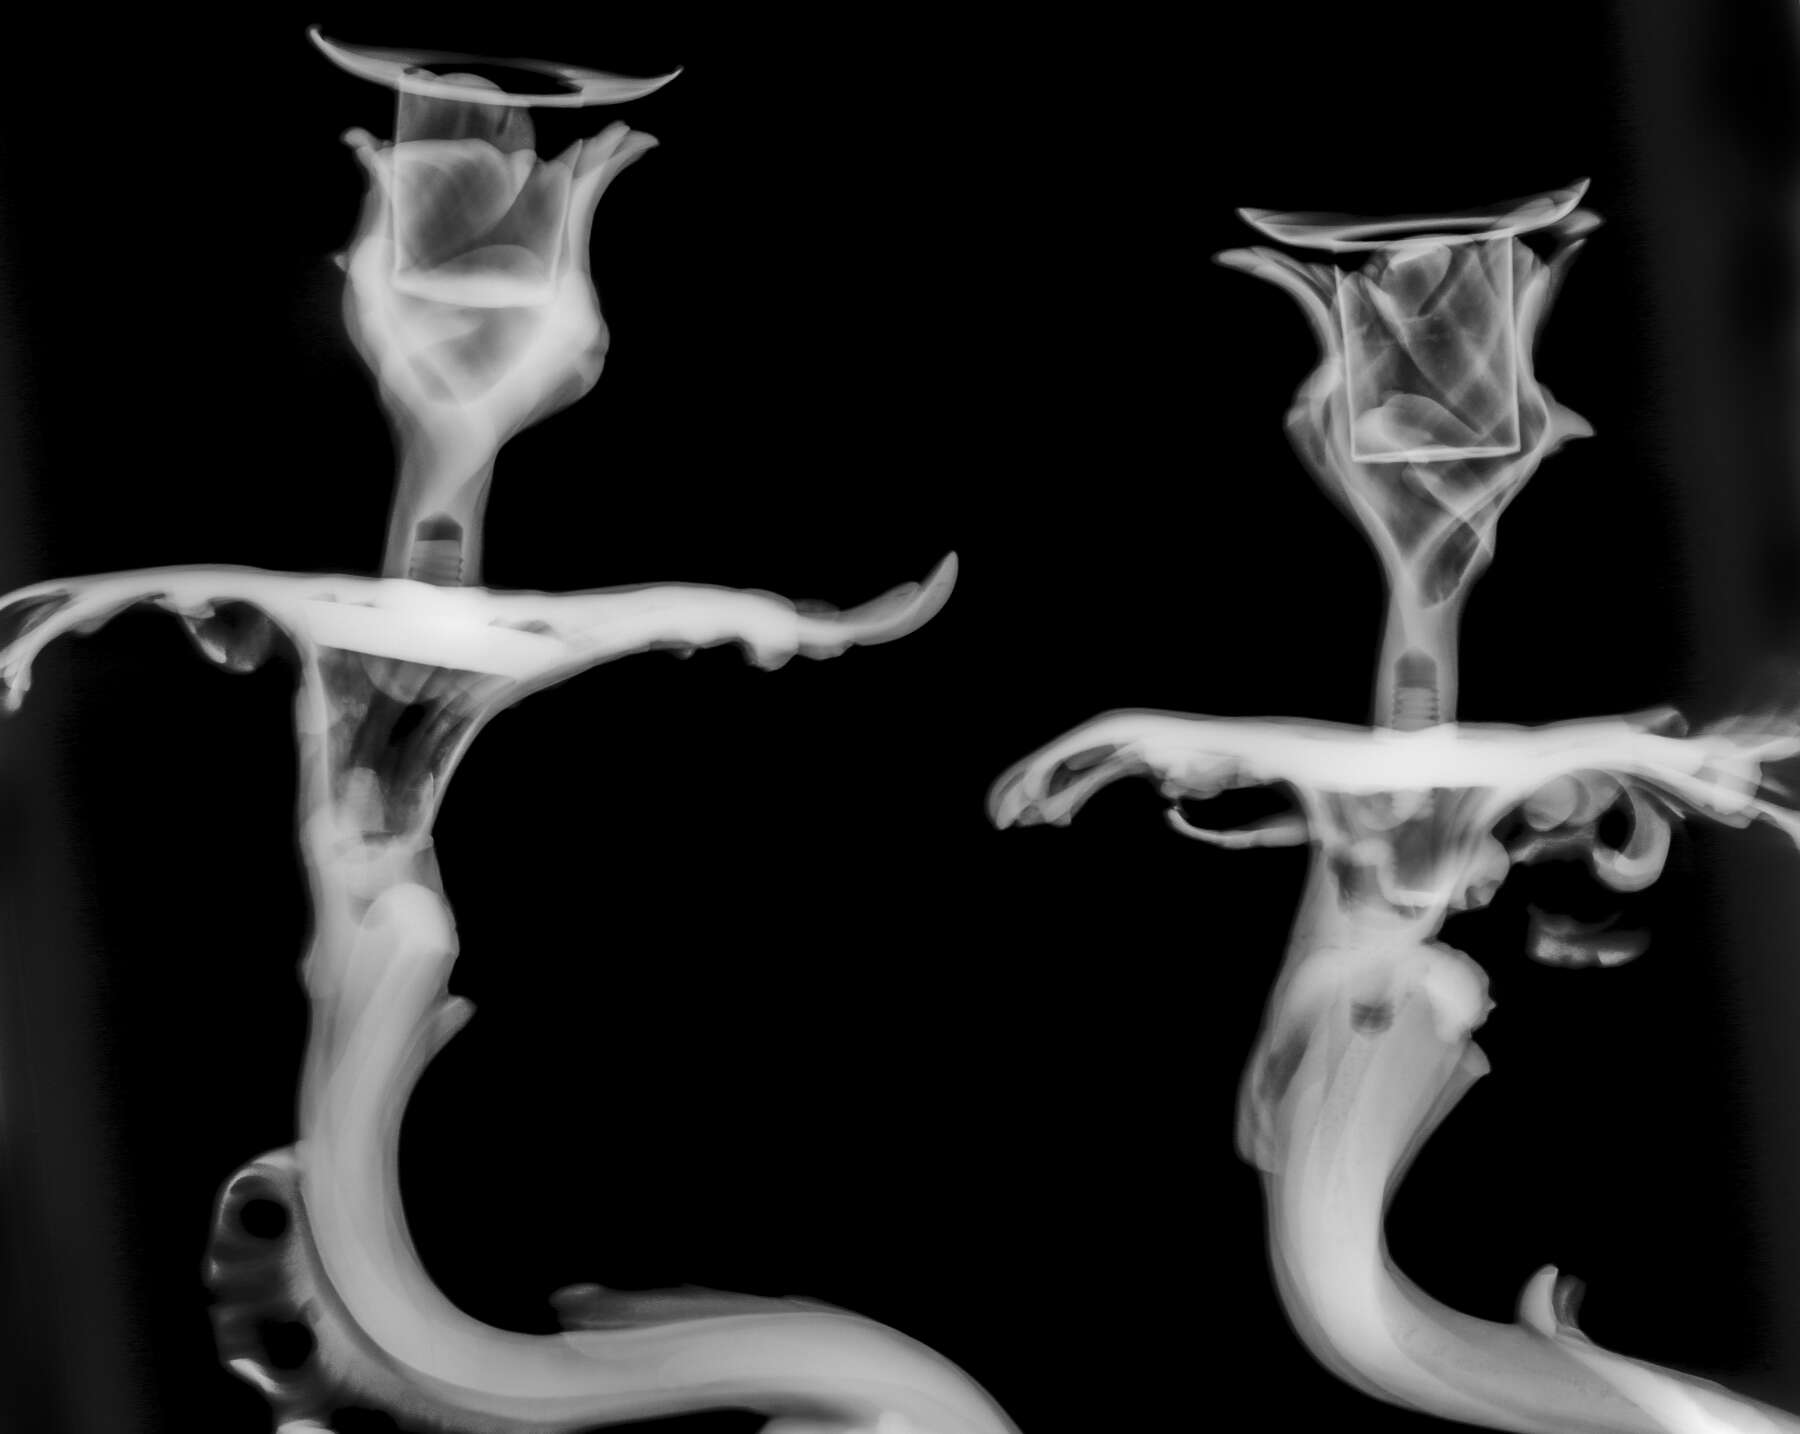 black-and-white x-ray of the gilt bronze candlestick mounts, revealing the threaded metal rods that connect the candle-holders to the bases